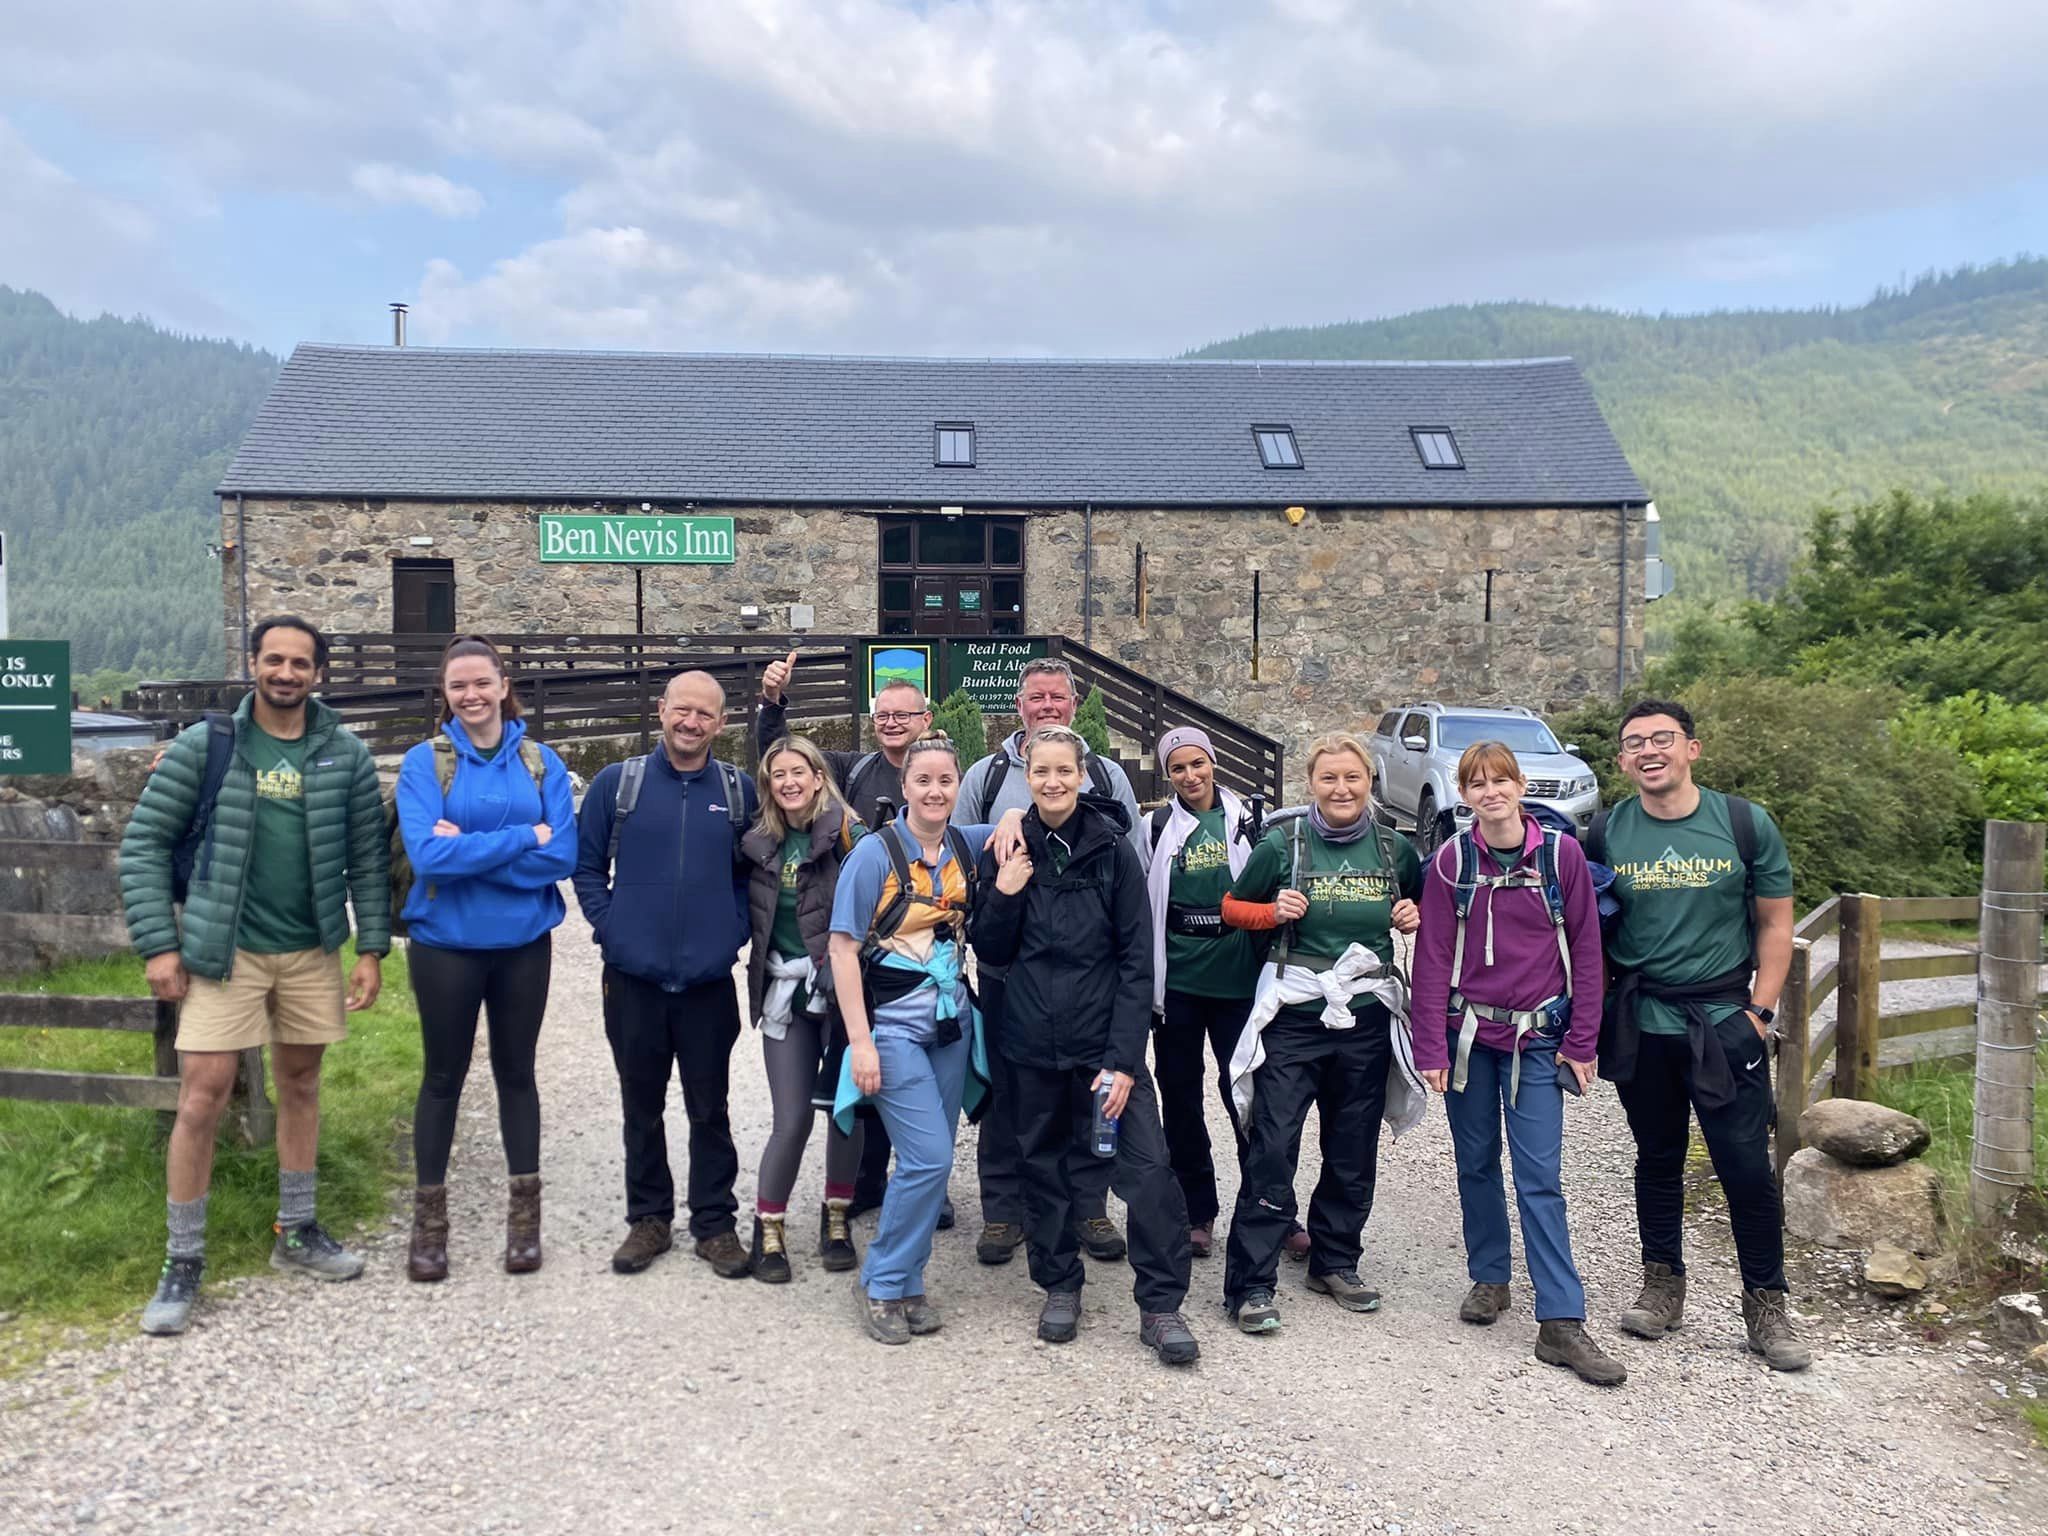 Millennium Care climb the 3 peaks as a charity challenge